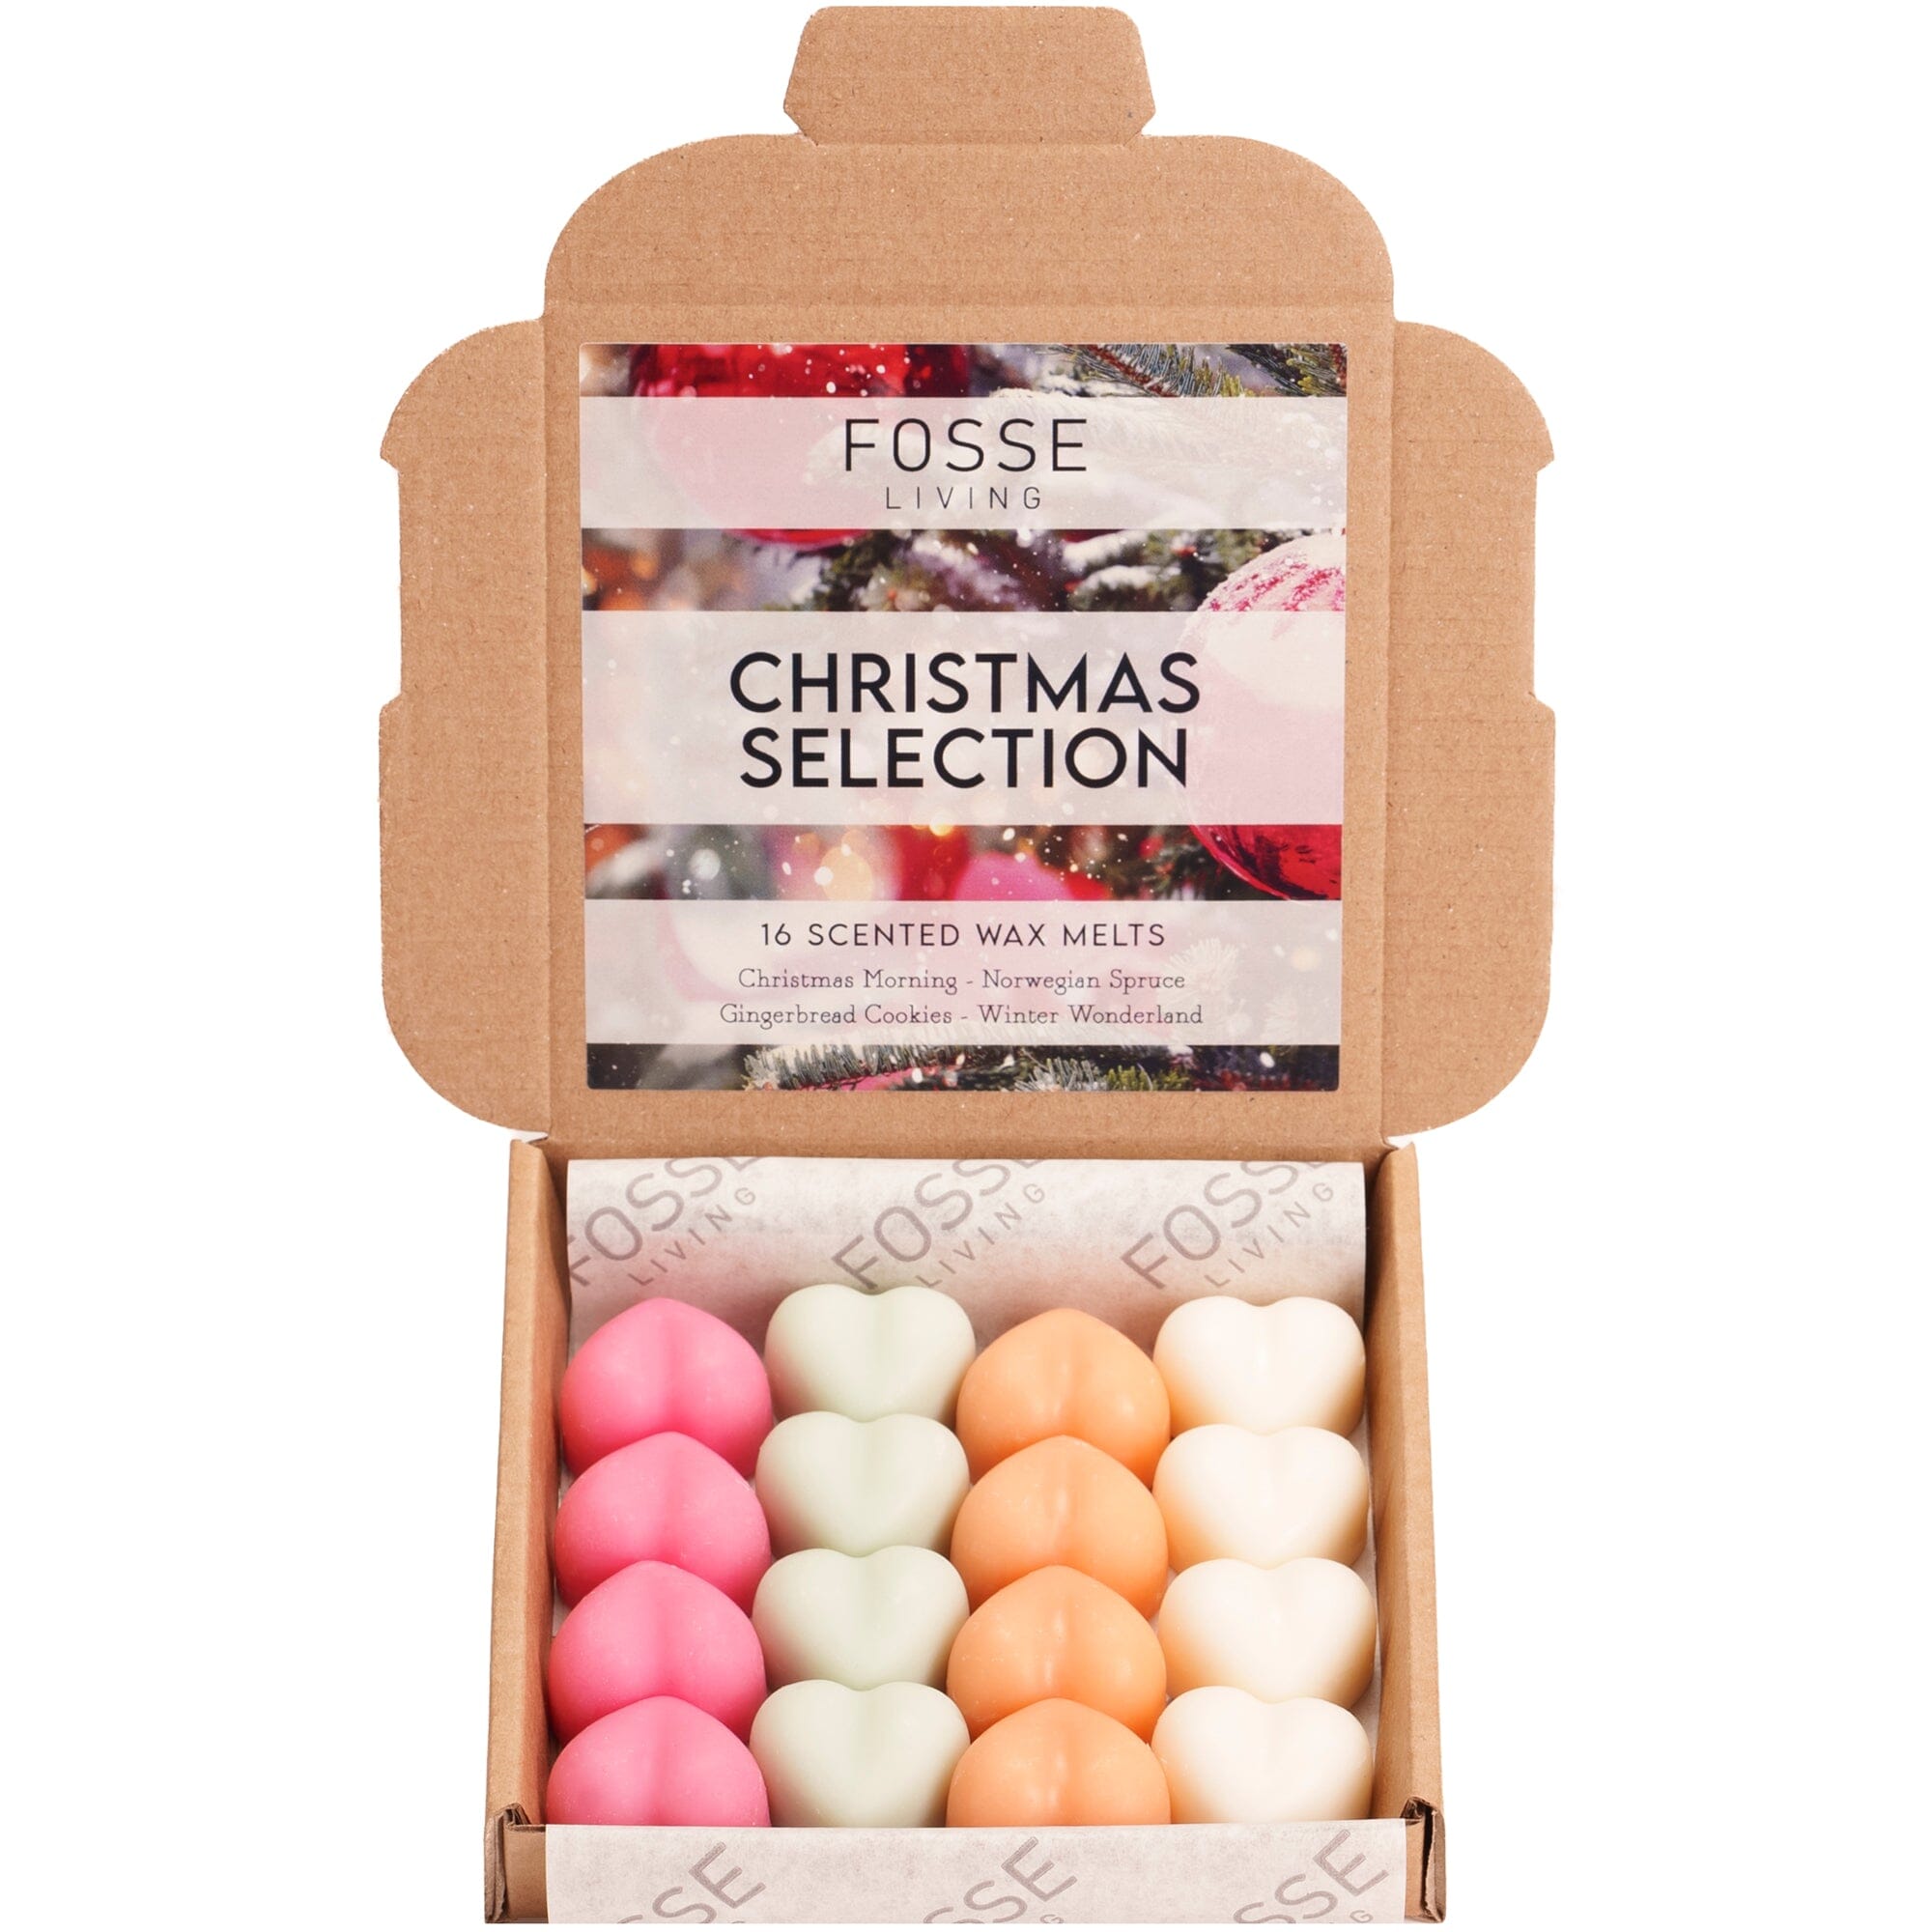 Christmas Scented Wax Melts Selection - Fosse Living